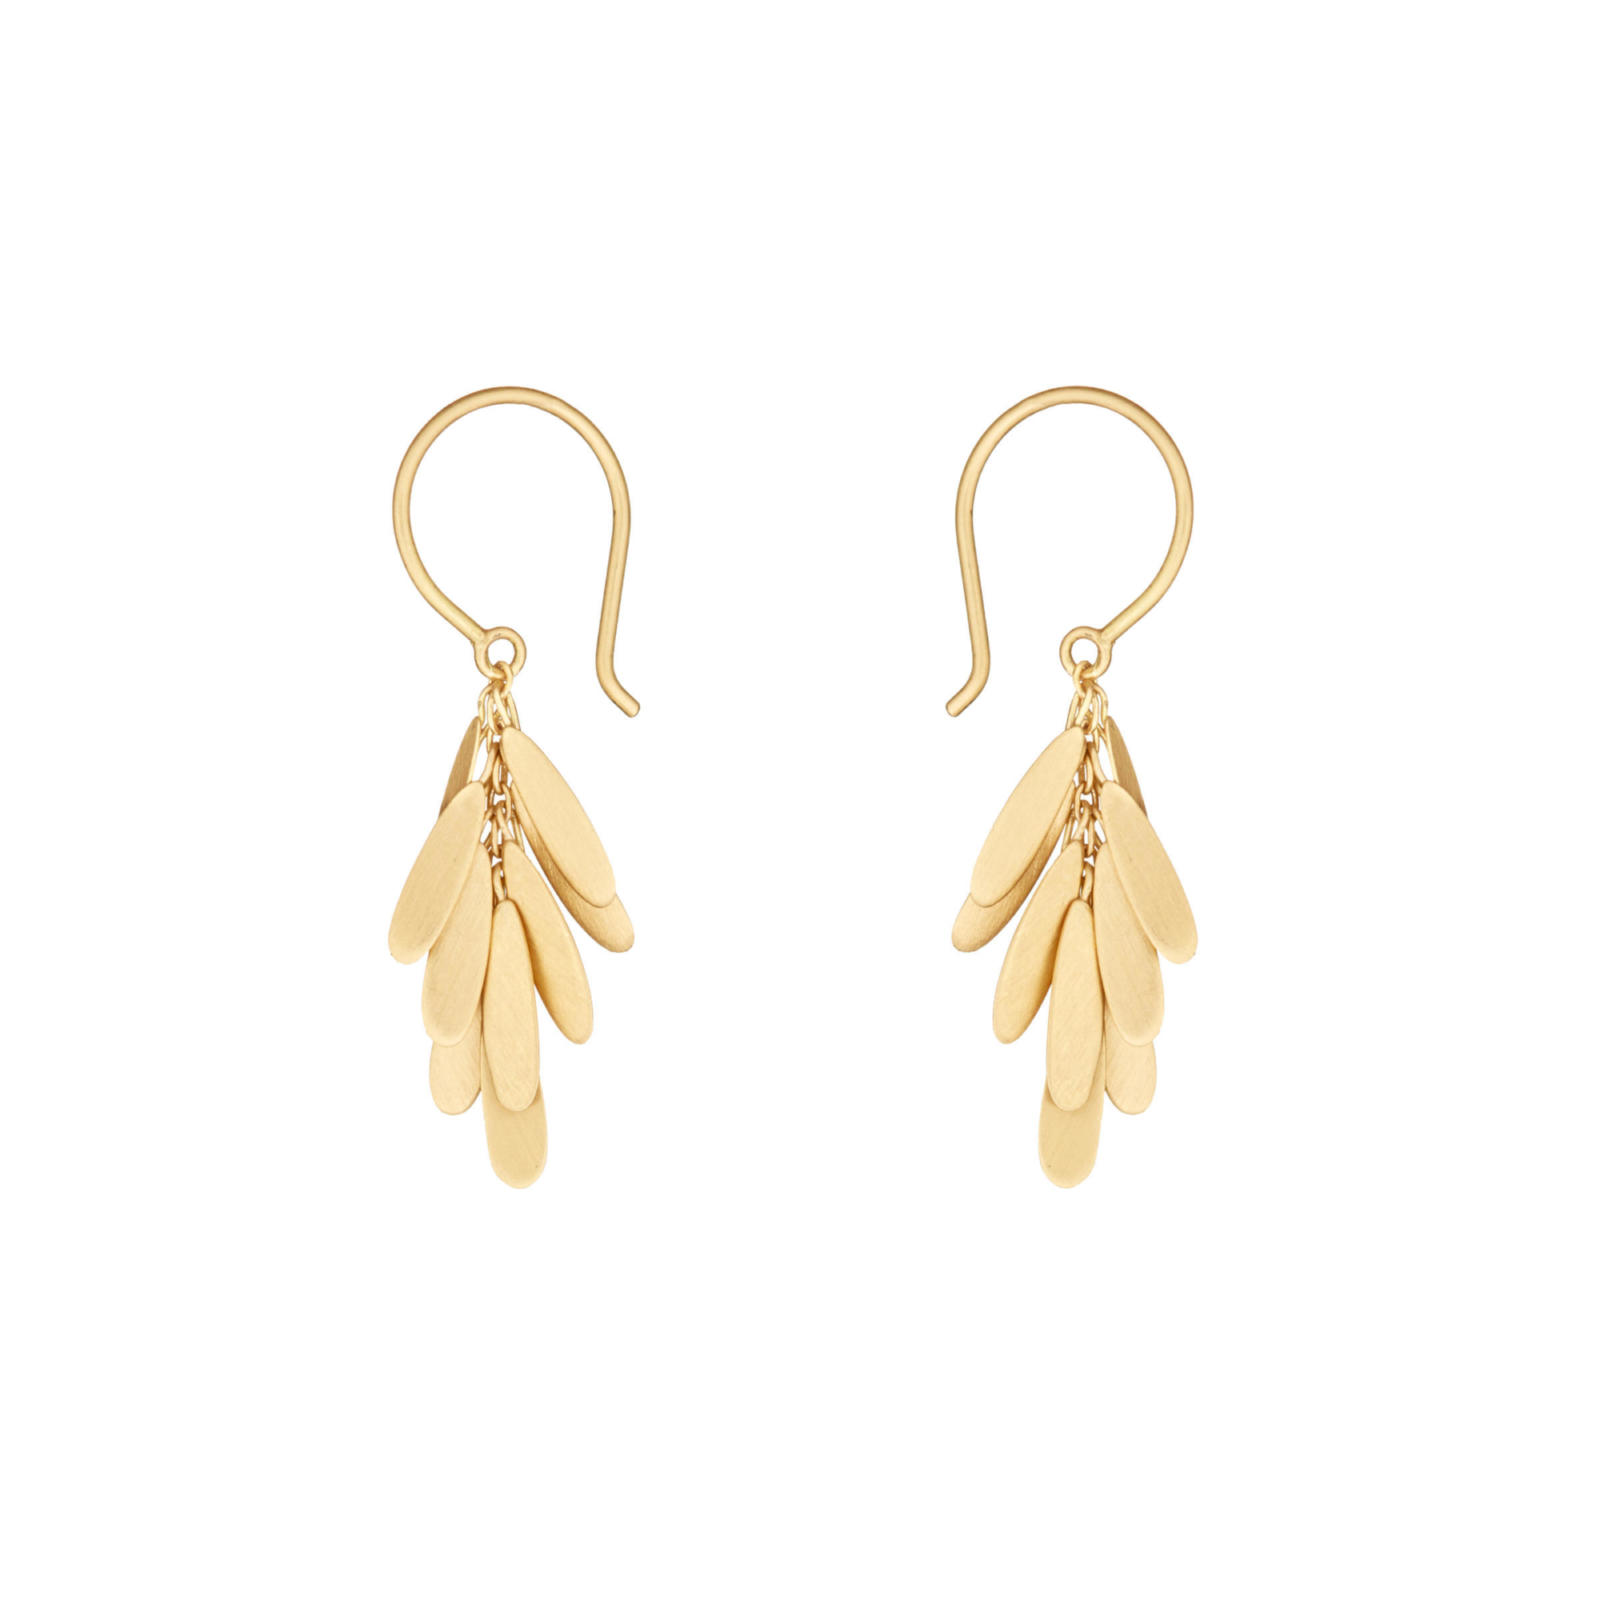 Sia Taylor ME15 Y Yellow Gold Earrings S